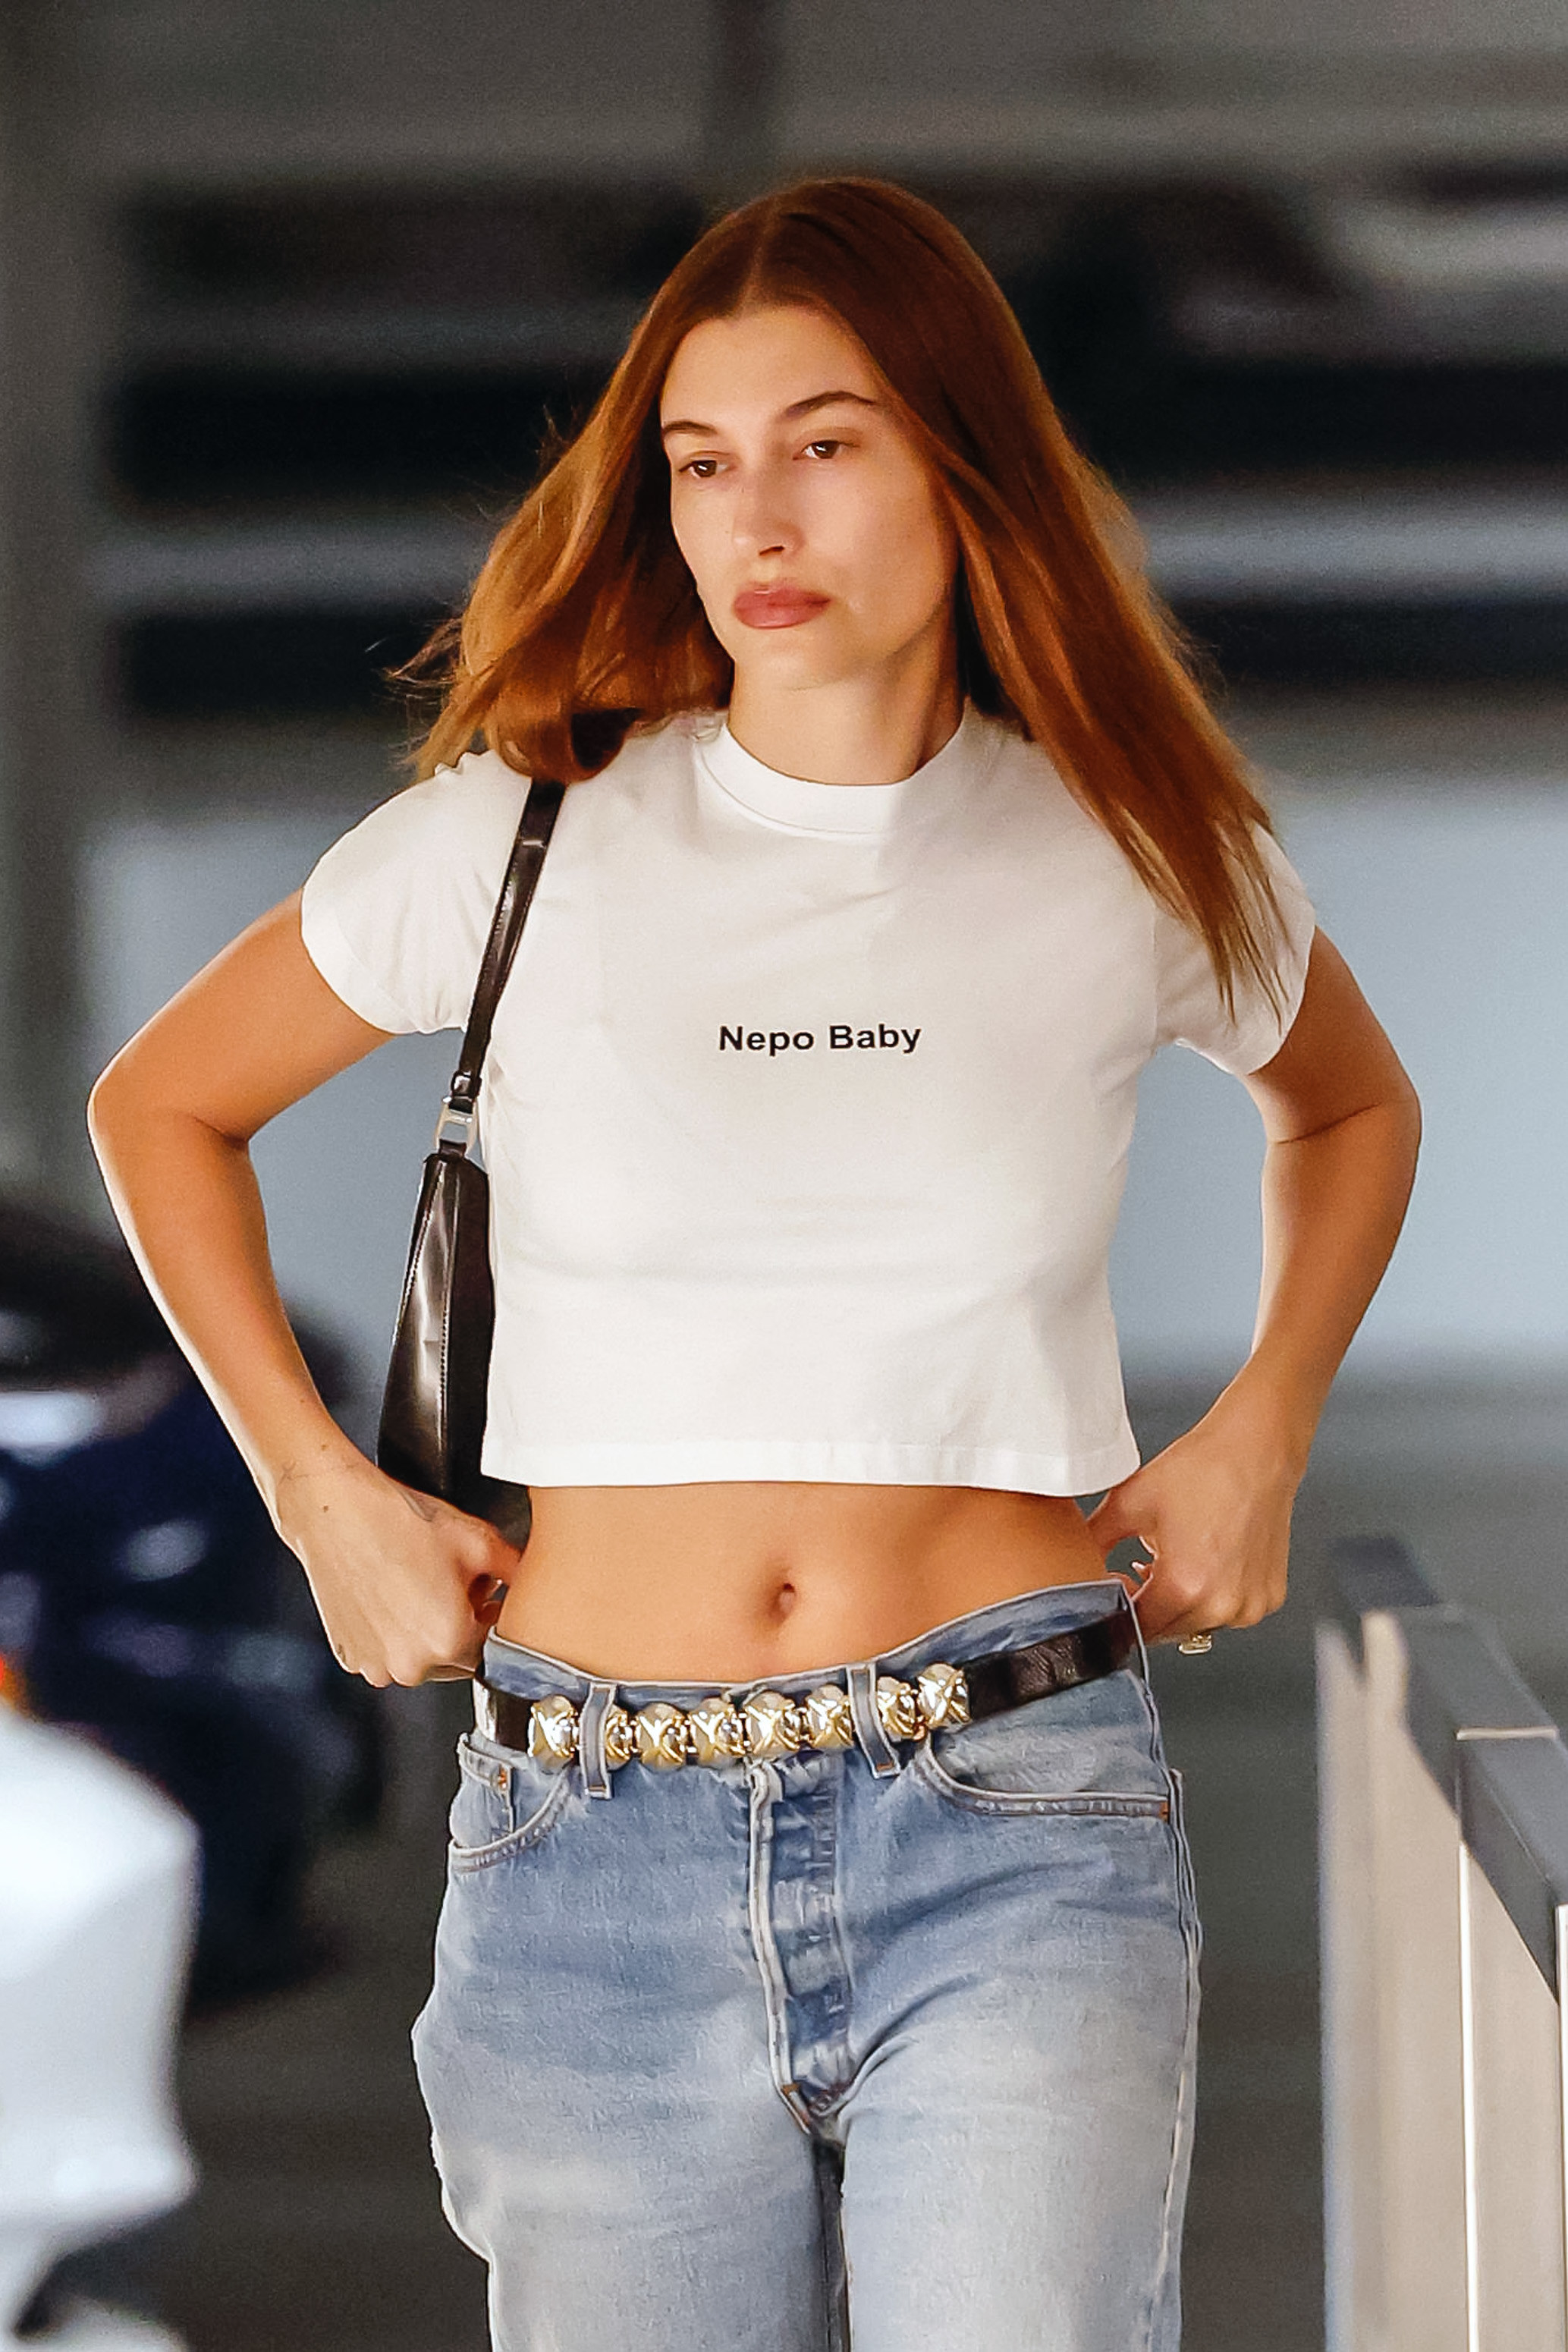 Hailey Bieber wearing the T-shirt and jeans on January 6, 2023, in Los Angeles